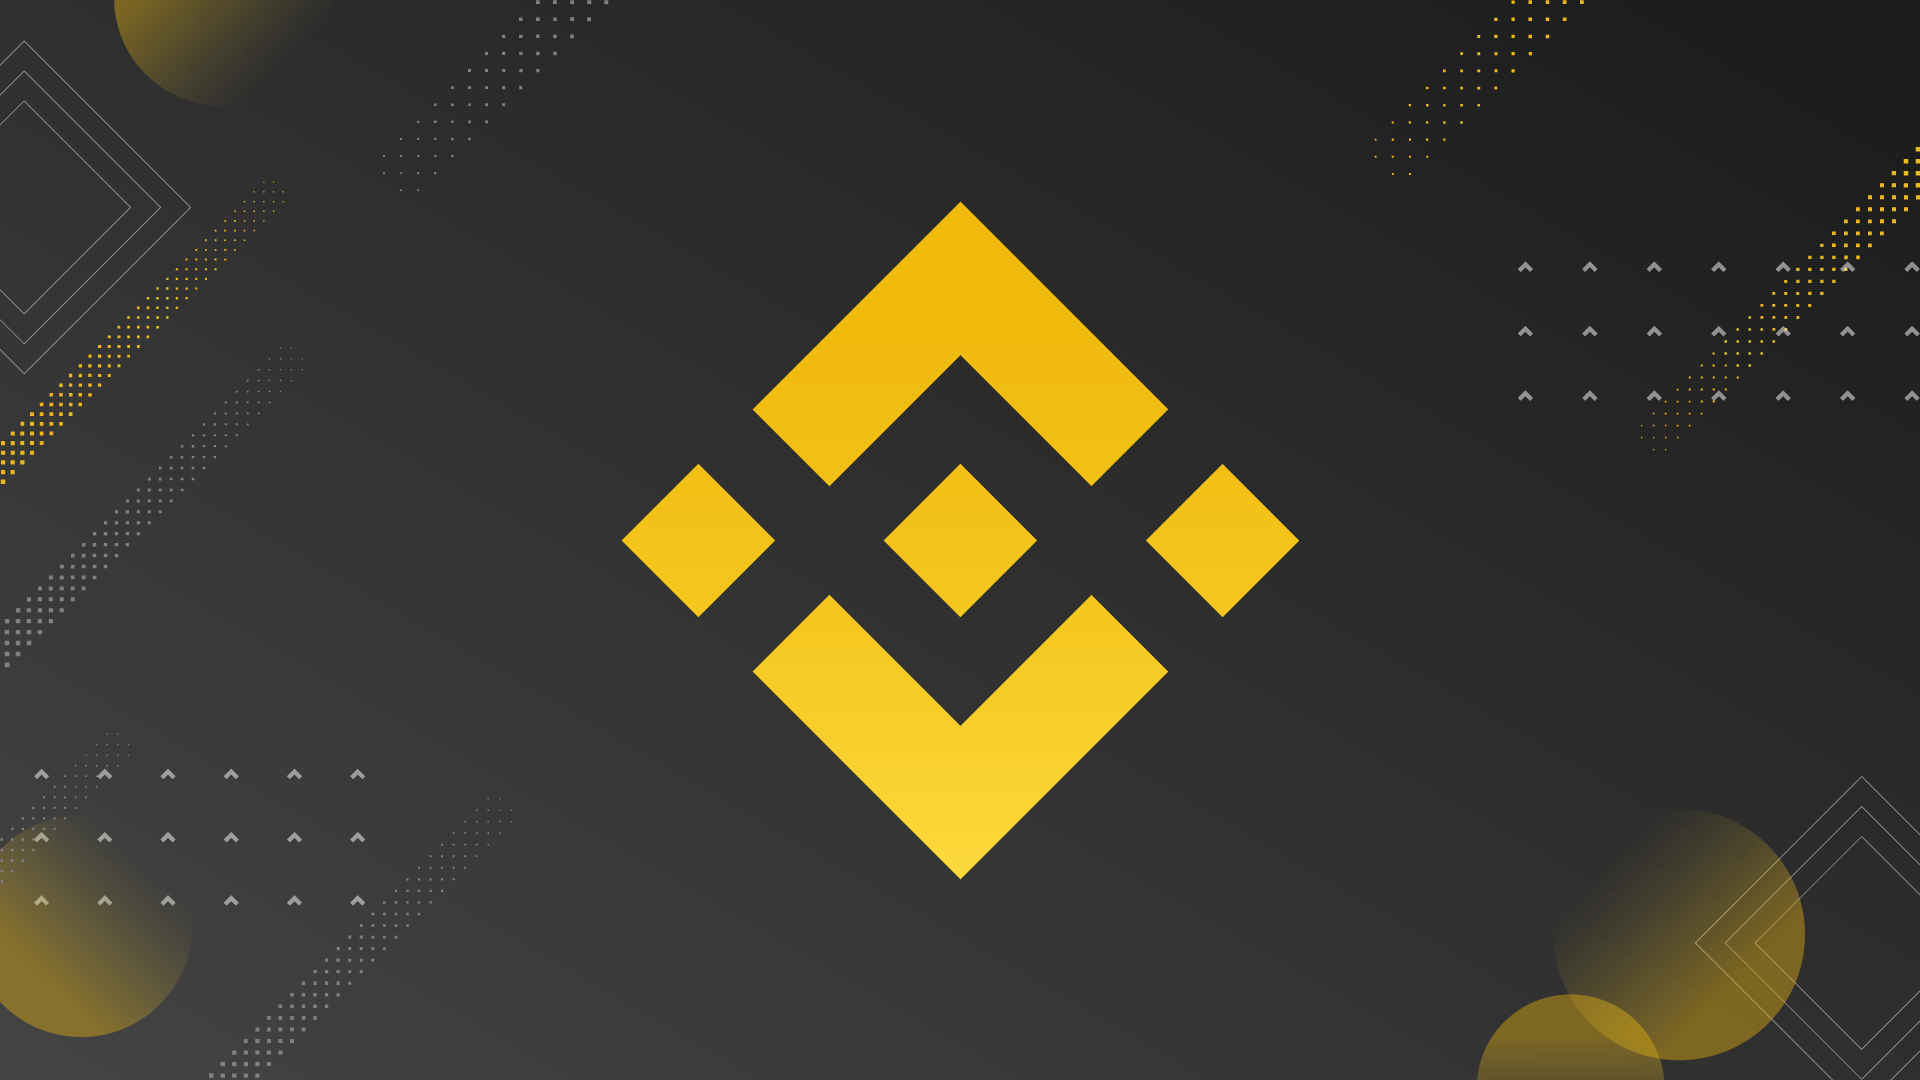 Get Your Official Binance Wallpapers and Image Here